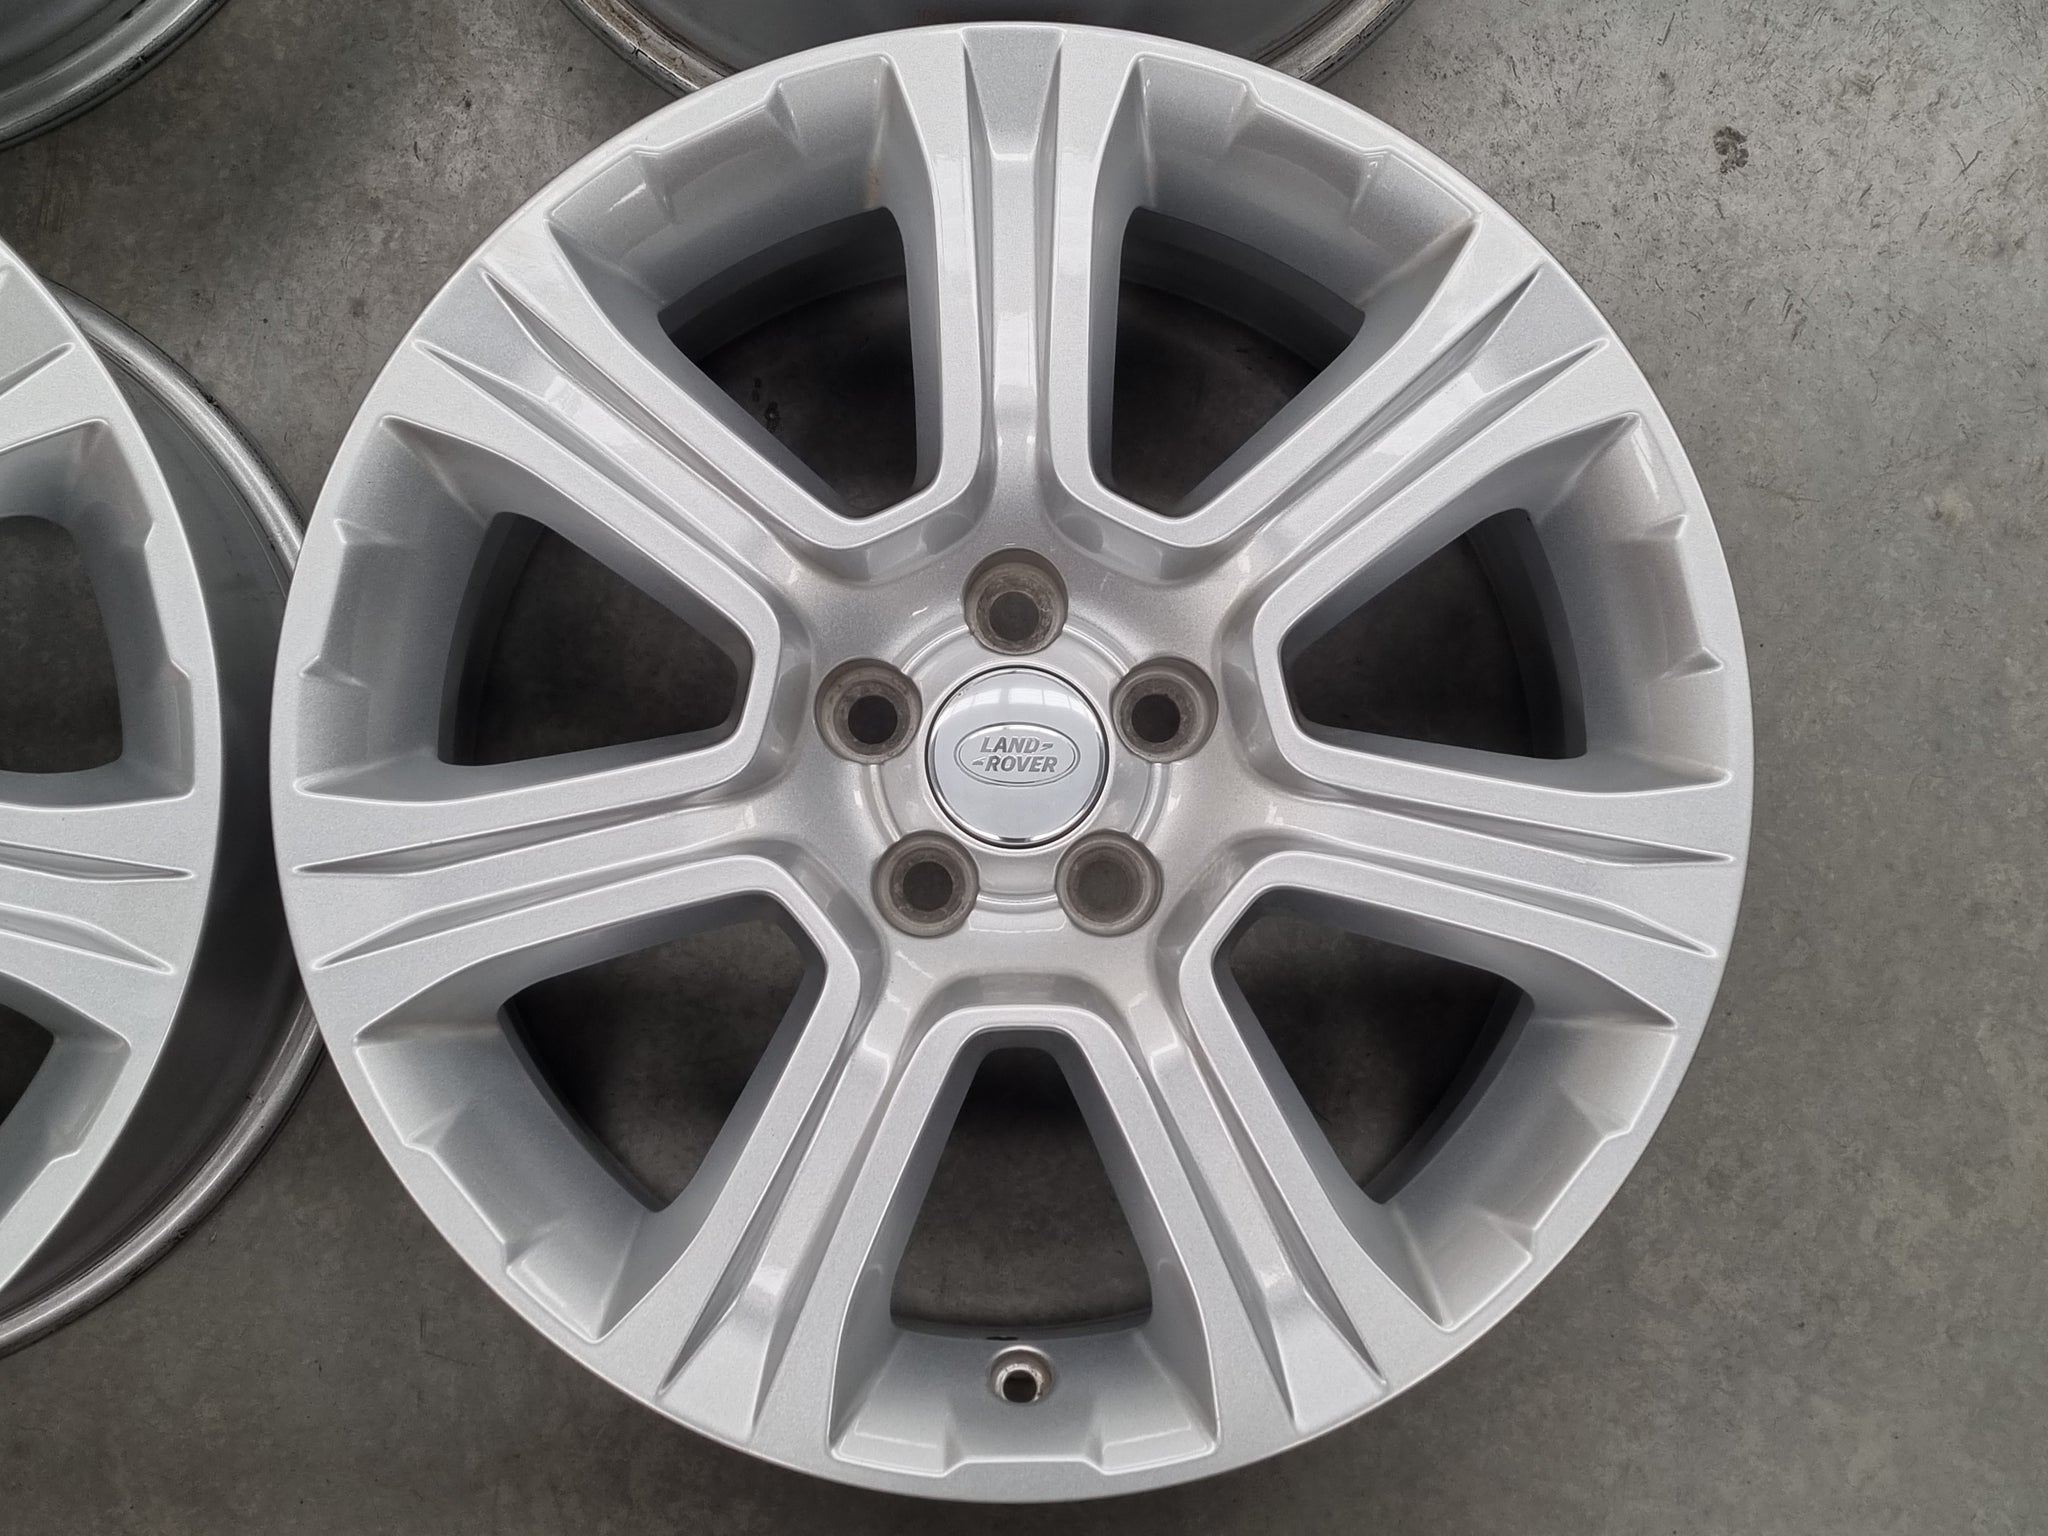 Load image into Gallery viewer, Genuine Range Rover Evoque GJ32 18 Inch Alloy Wheels Set of 4
